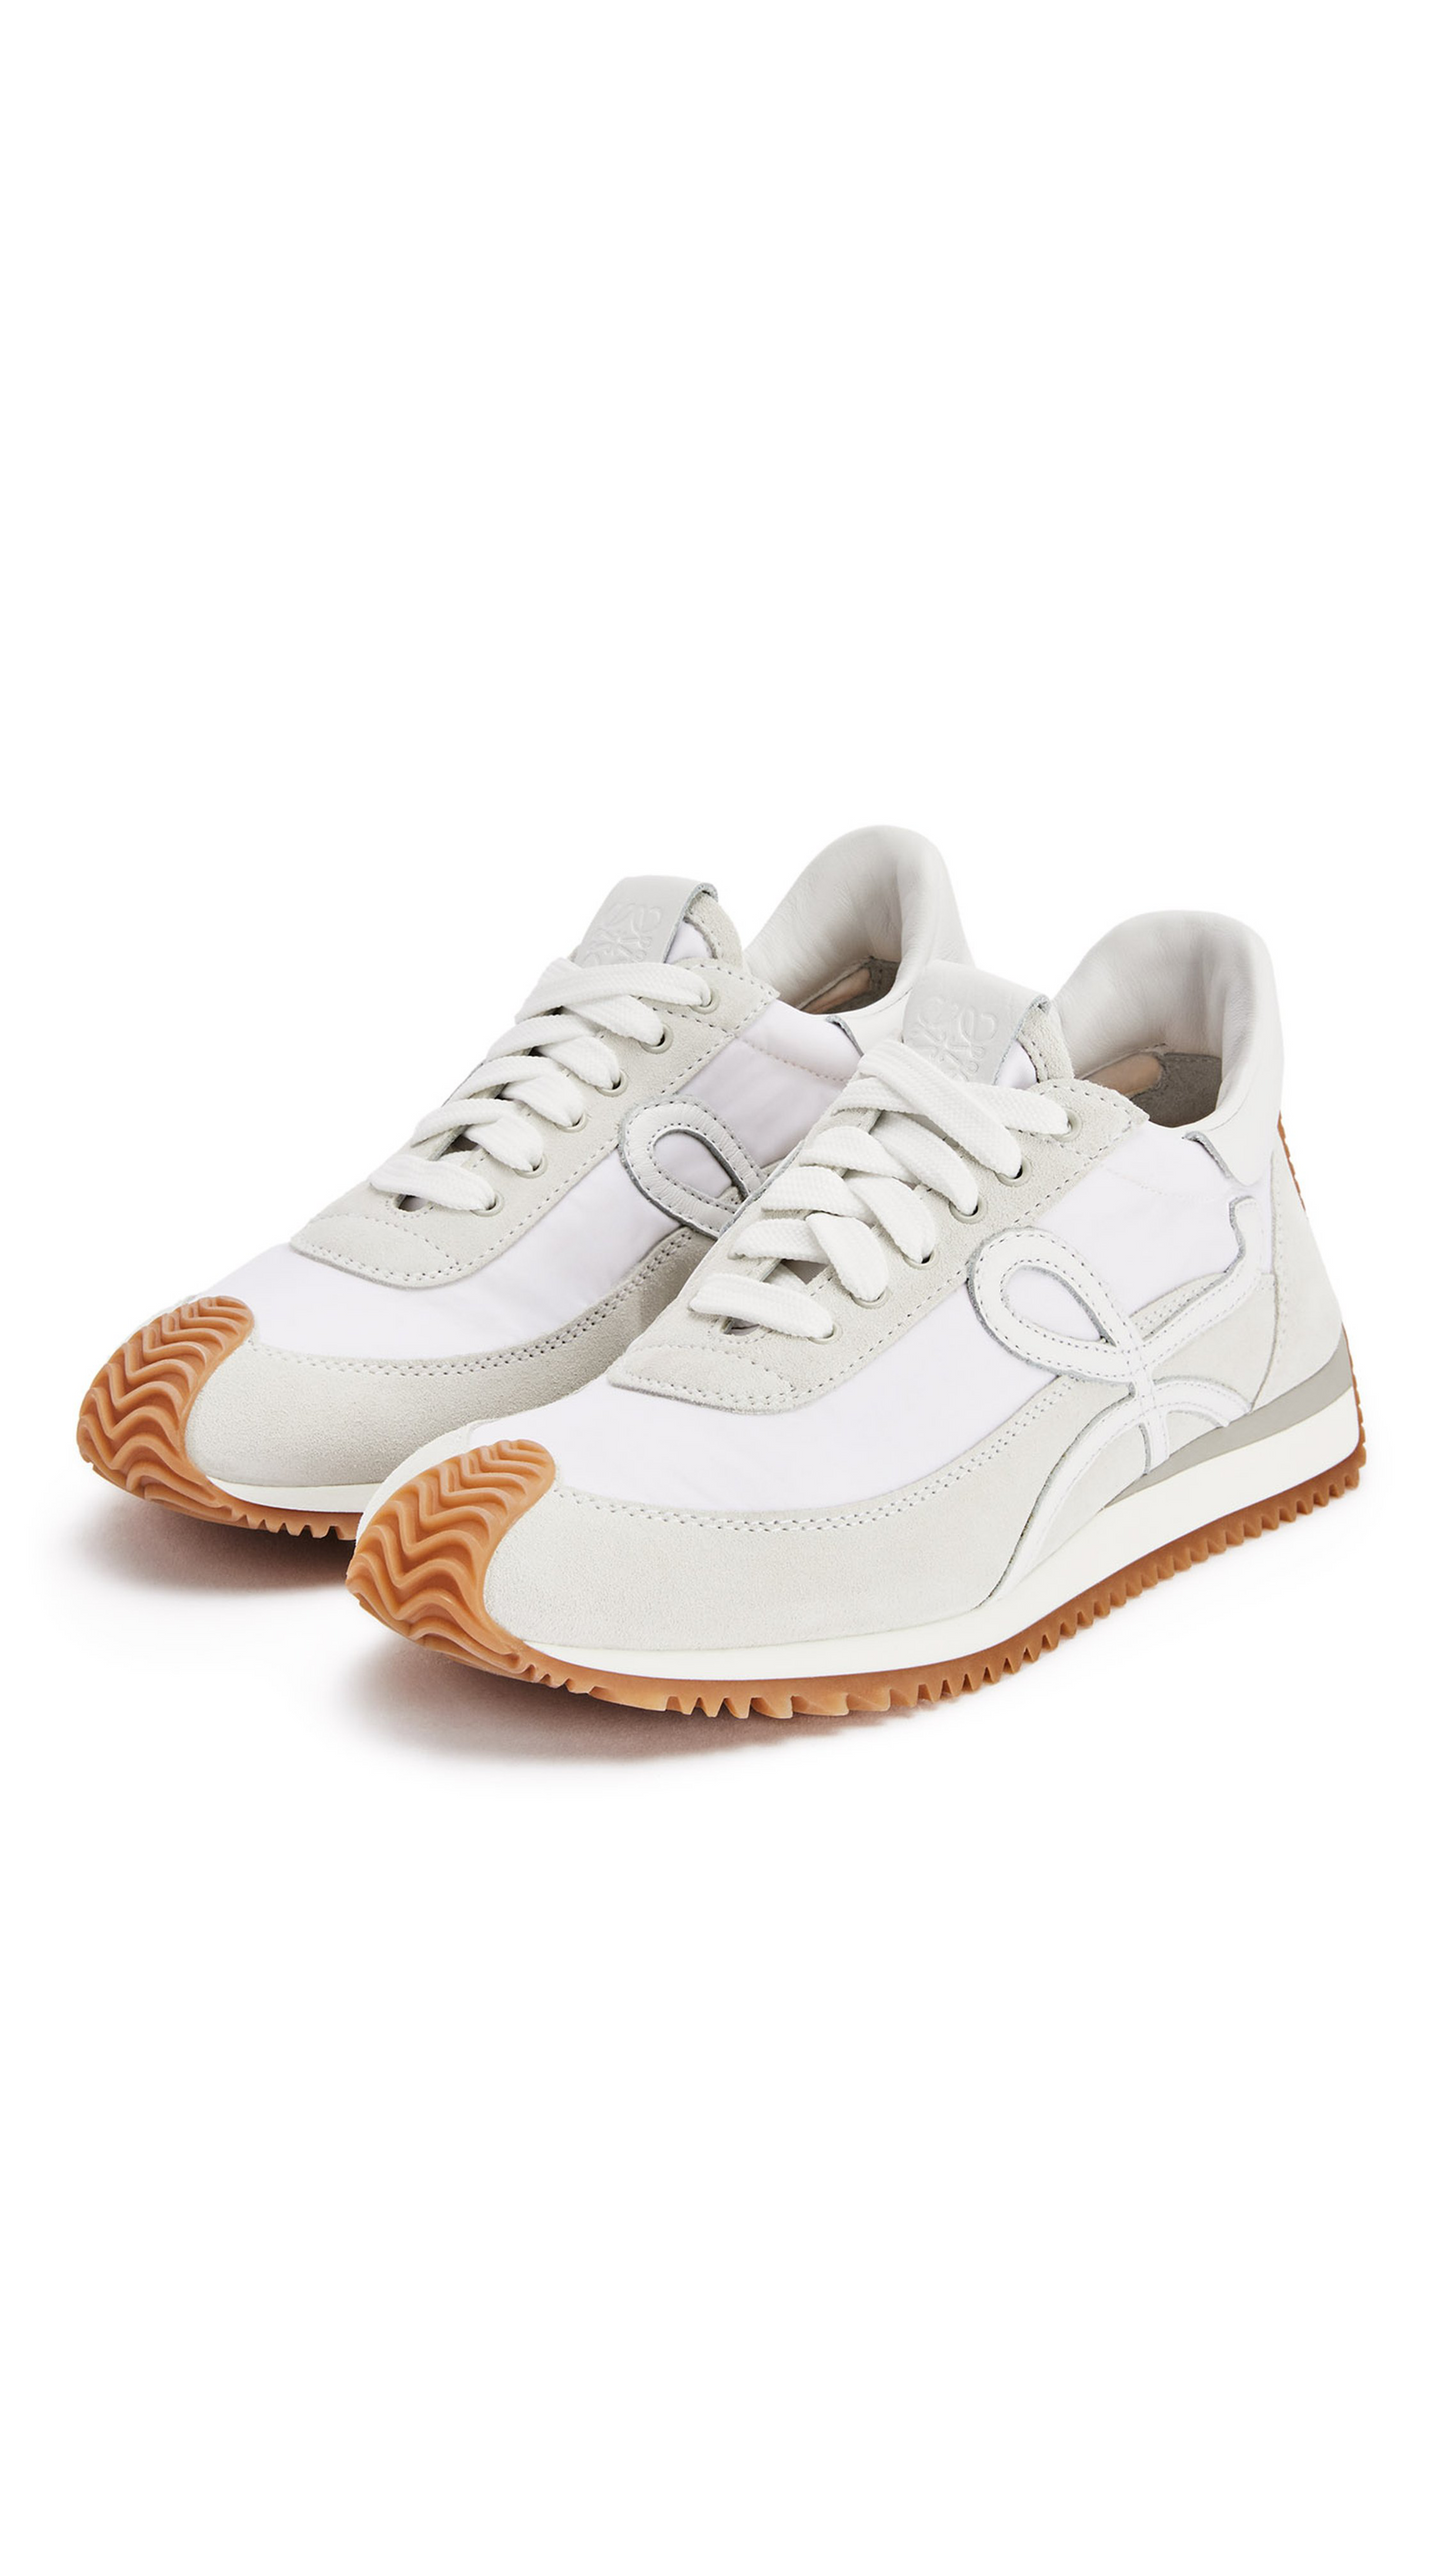 Flow Runner Sneakers in Nylon and Suede - White